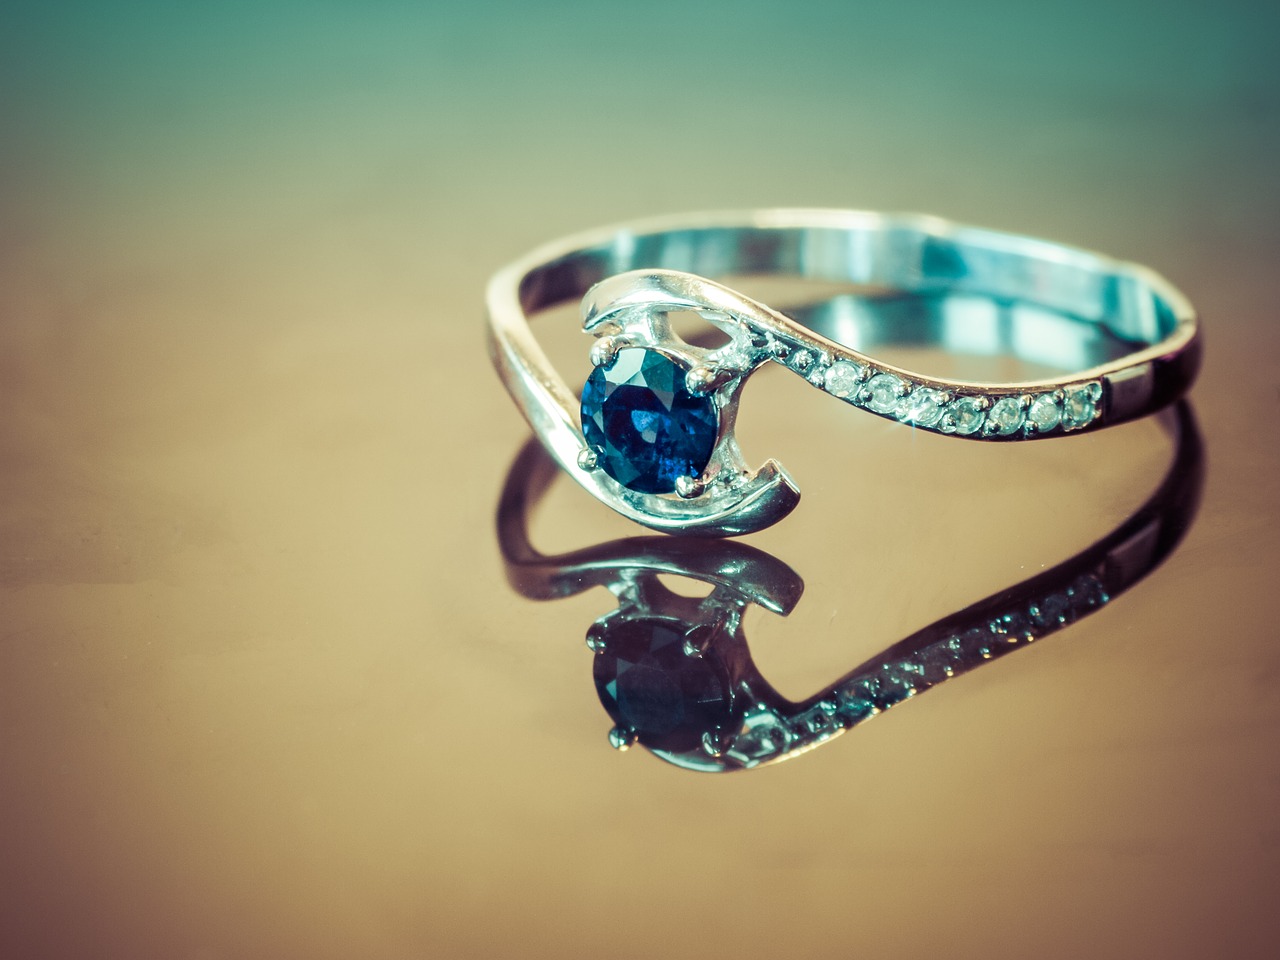 Heart in Diamond – Cremation Is Not the End